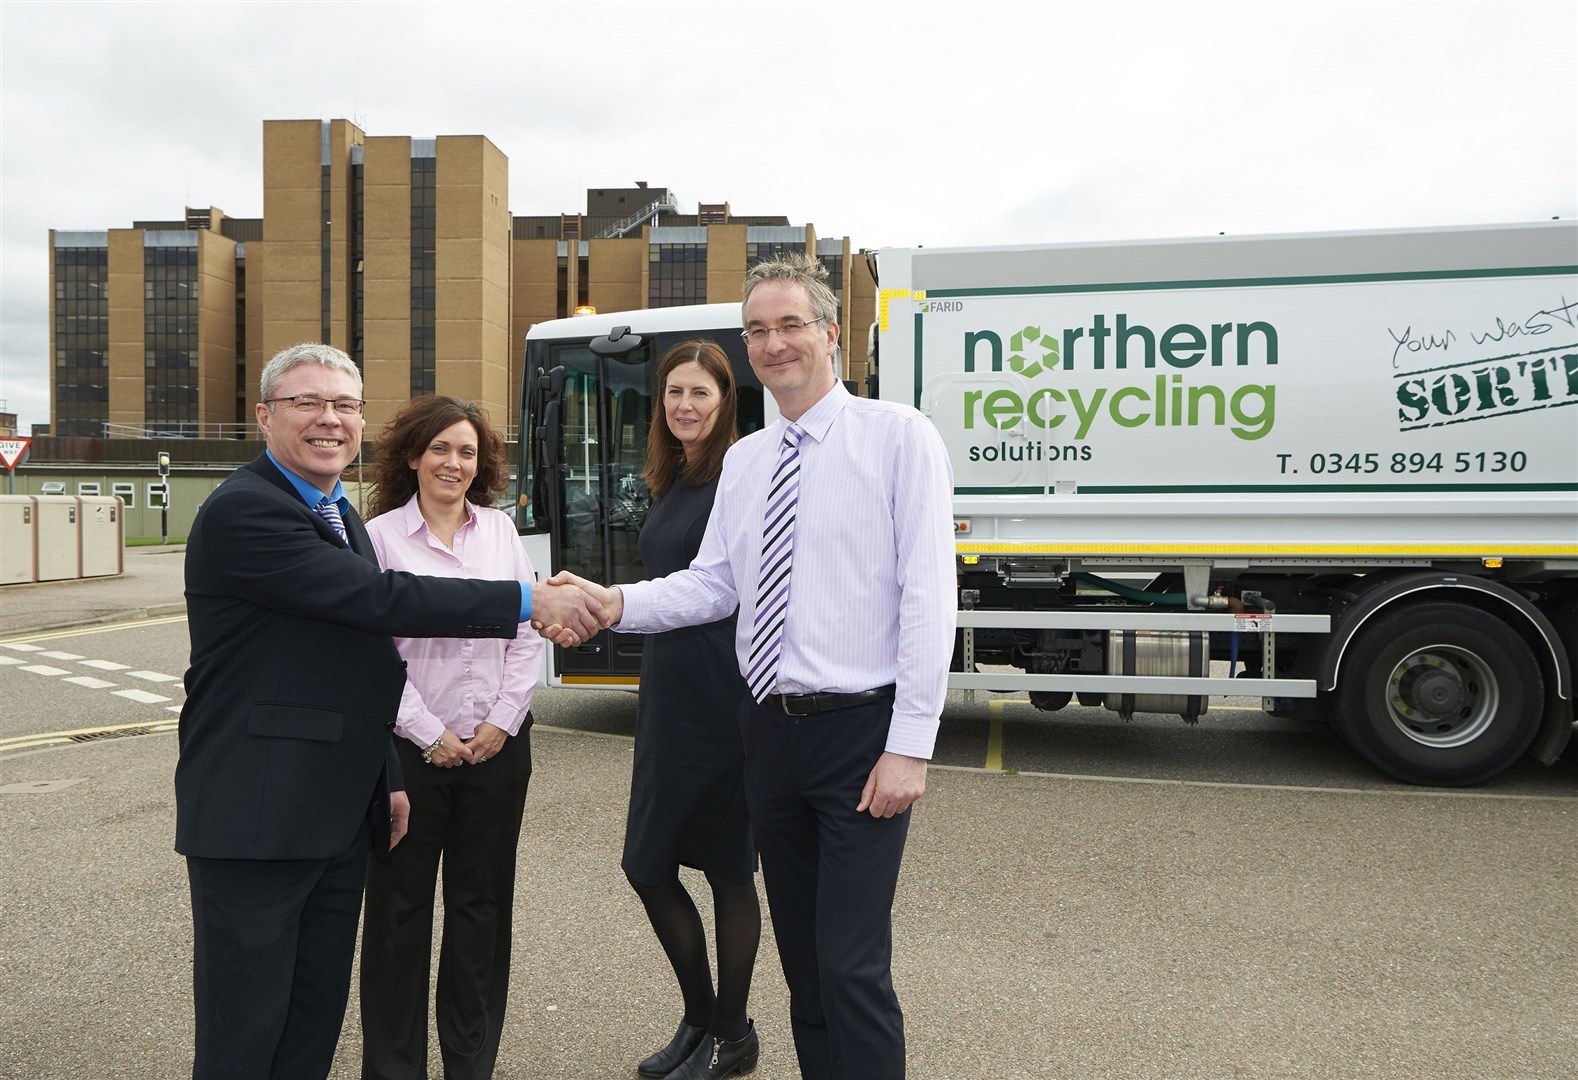 NHS Highland environmental and sustainability managers John Burnside and Ruth Innes with Katie Mount and Ewan Calder of Northern Recycling Solutions.